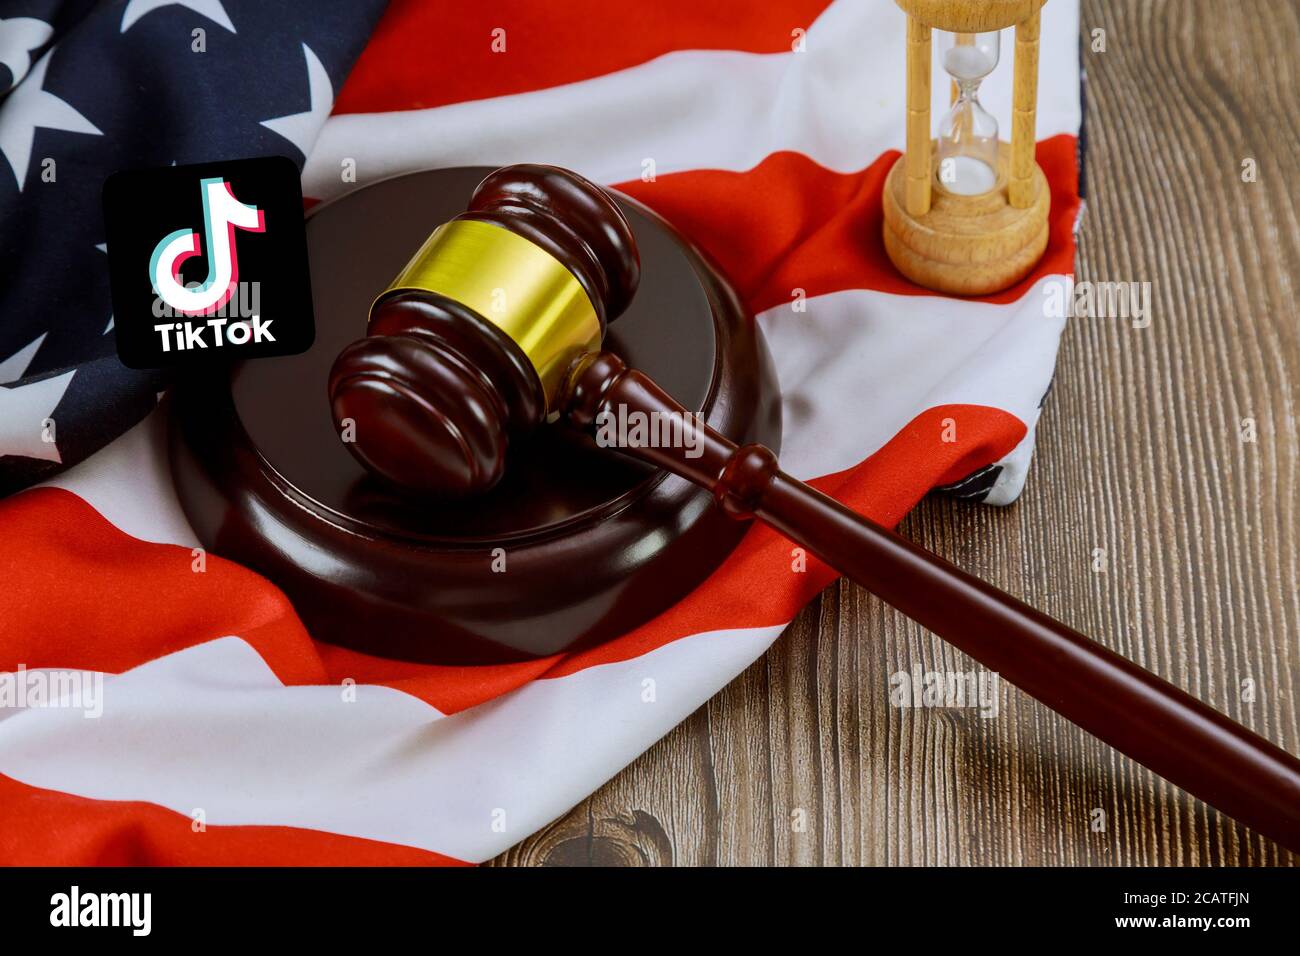 WASHINGTON D.C., USA - AUGUST 05, 2020: Conflict between the President of the United States and the Chinese company tik tok on Justice gavel lawyers office symbol legal law with hourglass on United States flag Stock Photo